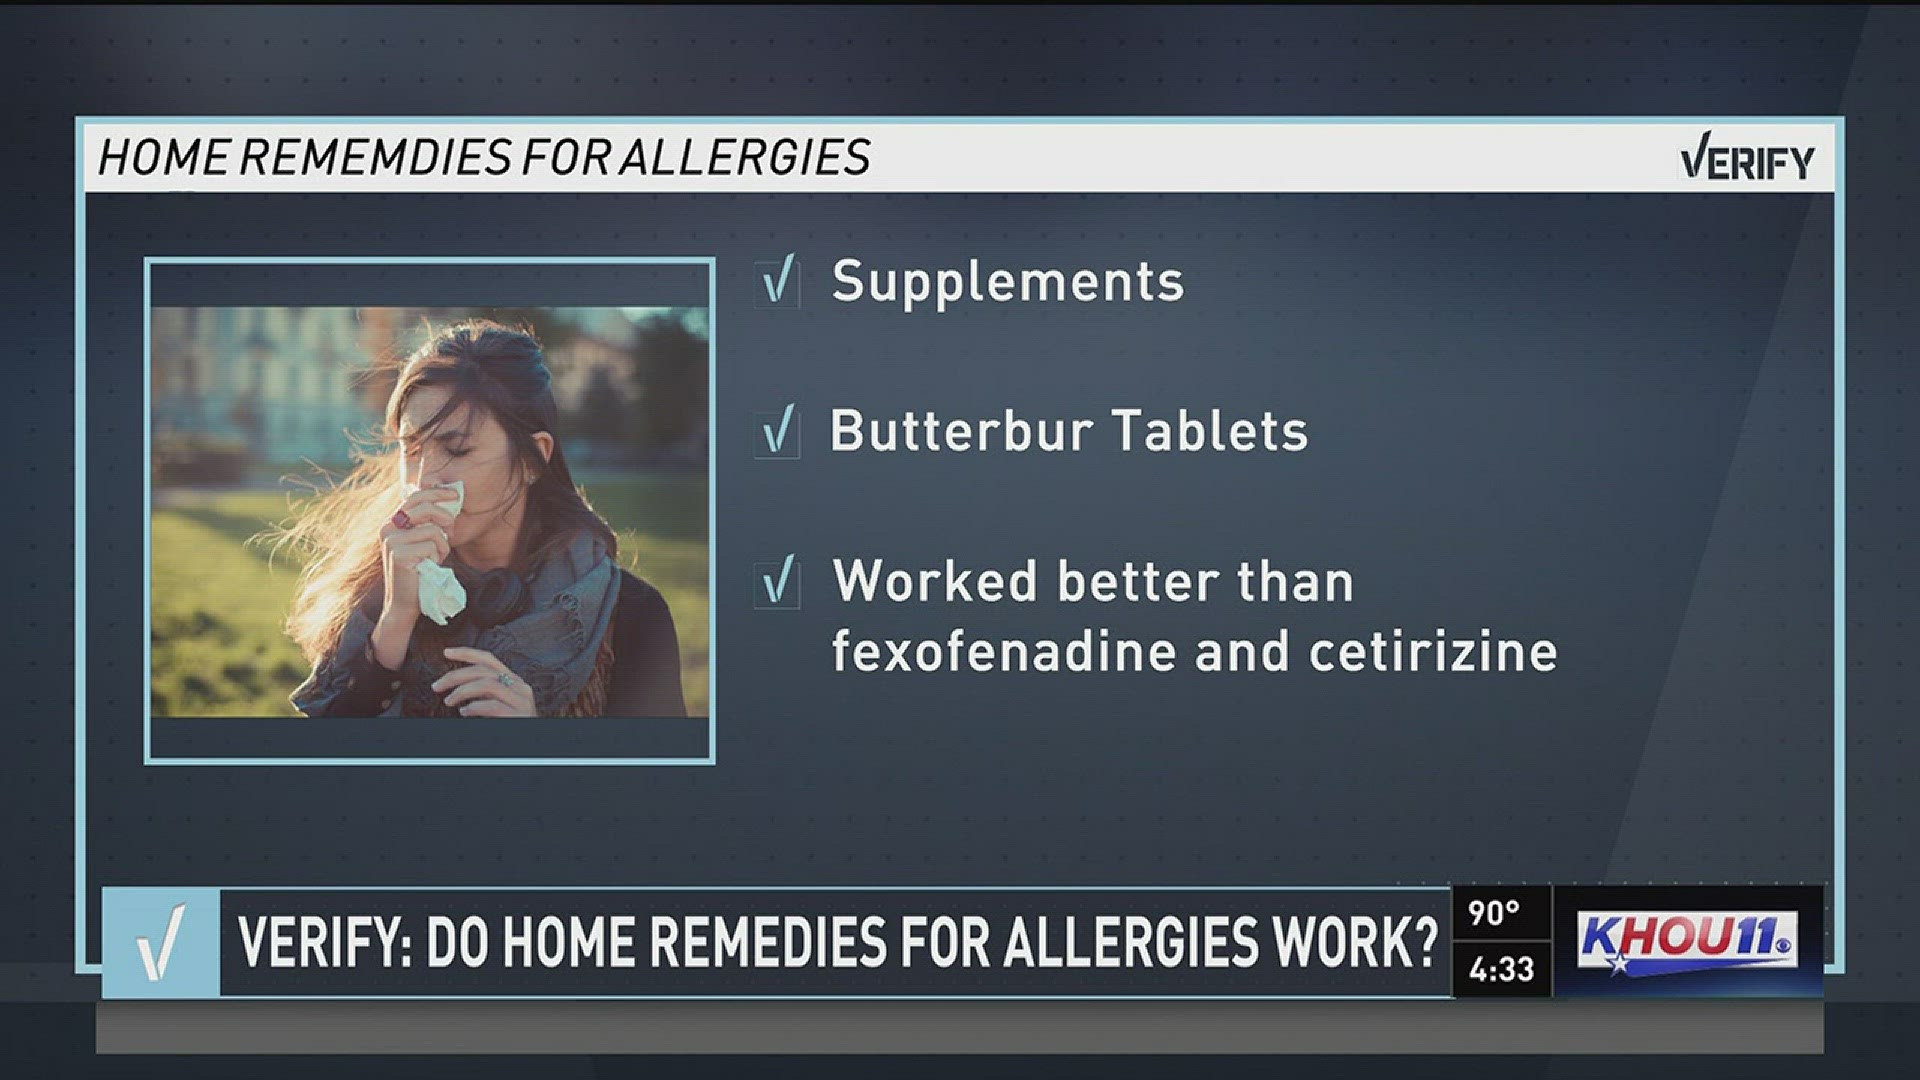 Fall allergies are already in full swing so our Verify team wanted to know - do home remedies for allergy relief actually work?